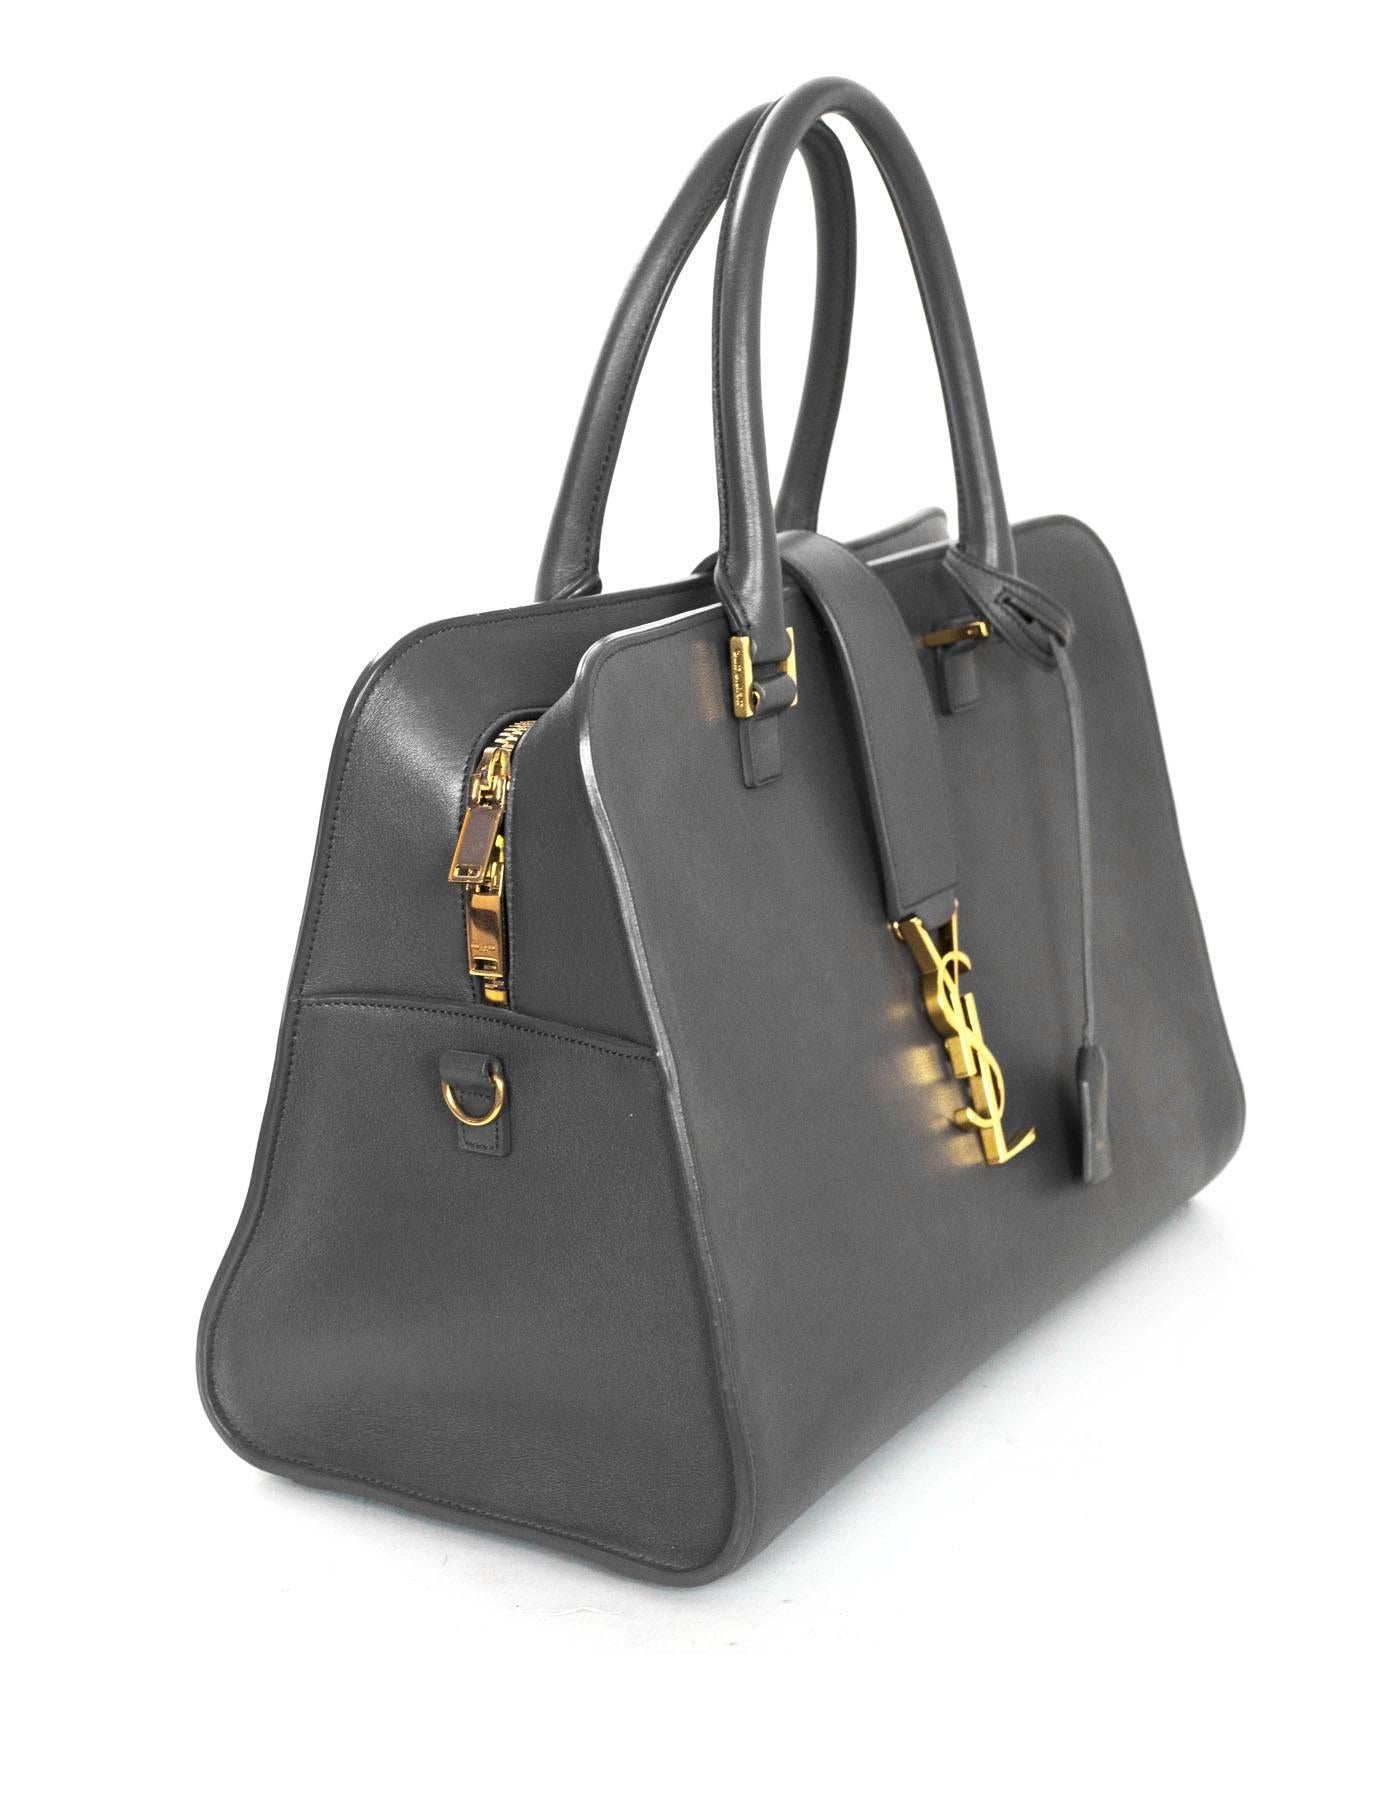 Saint Laurent Dark Anthracite Grey Medium Cabas Tote
Features goldtone YSL emblem on front

Made In: Italy
Color: Grey
Hardware: Goldtone
Materials: Leather, crystal and metal
Lining: Grey suede and leather
Closure/Opening: Double zip around closure